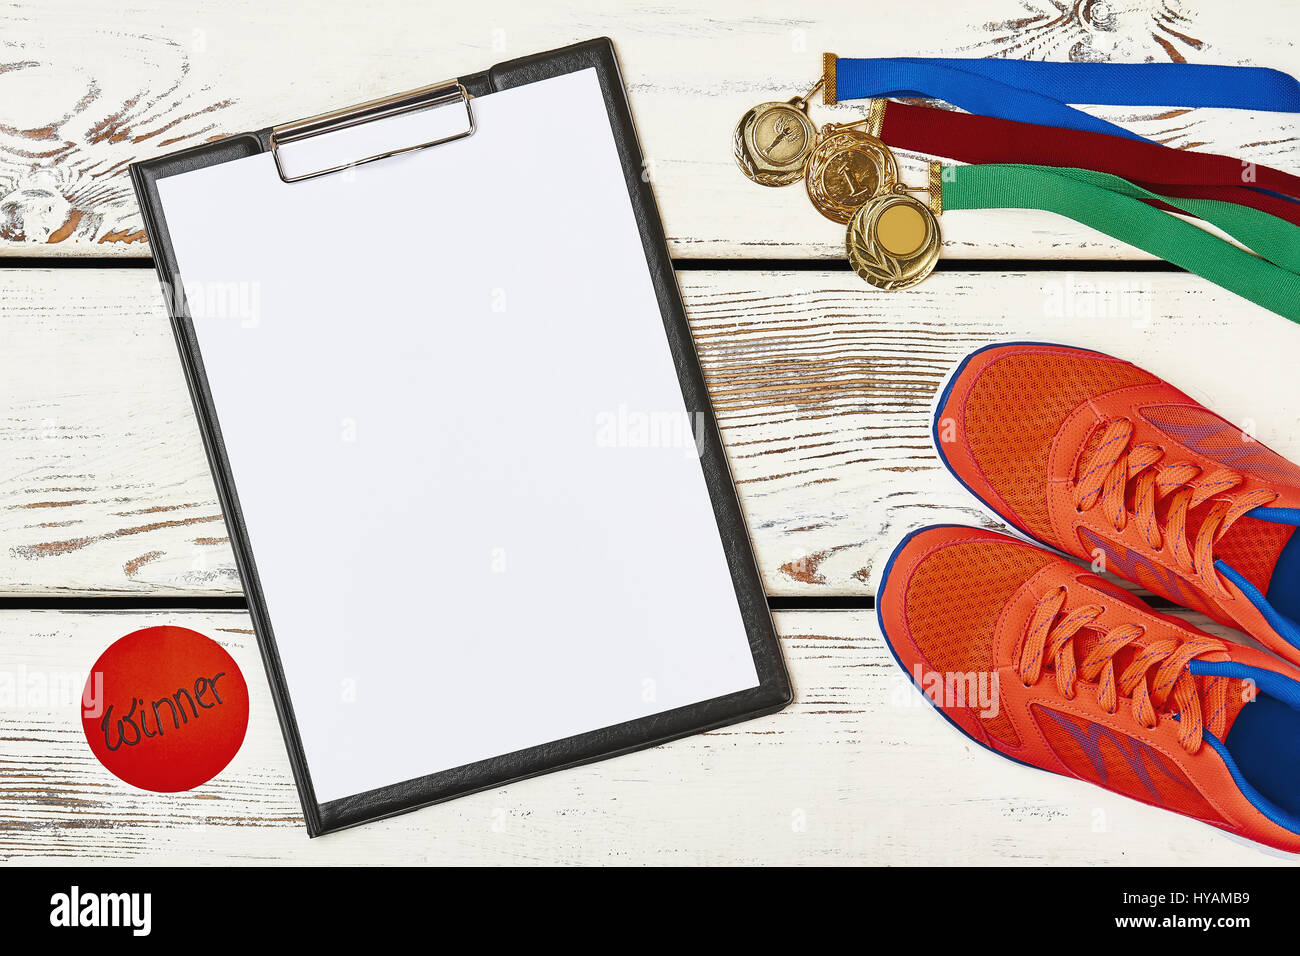 Medal, sneakers and clipboard. Stock Photo